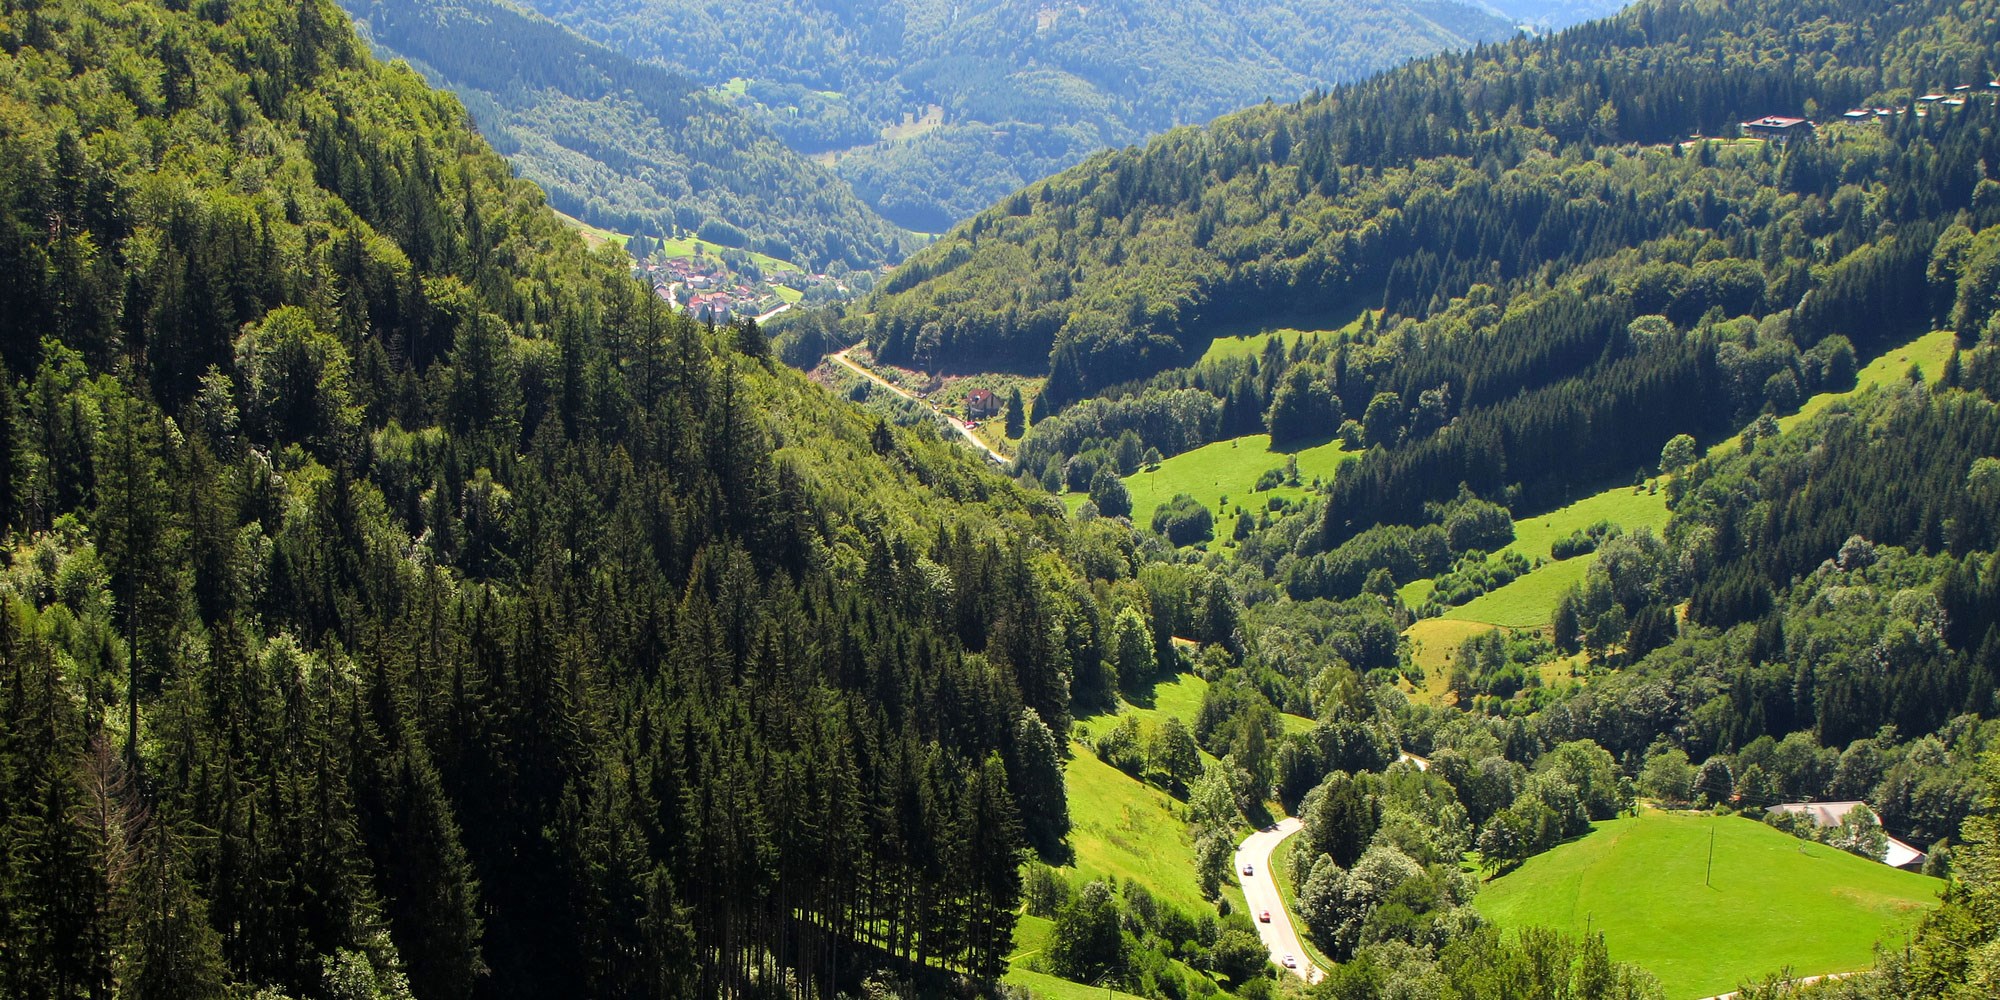 Germany’s enchanting black forest, not a cake - tipntrips